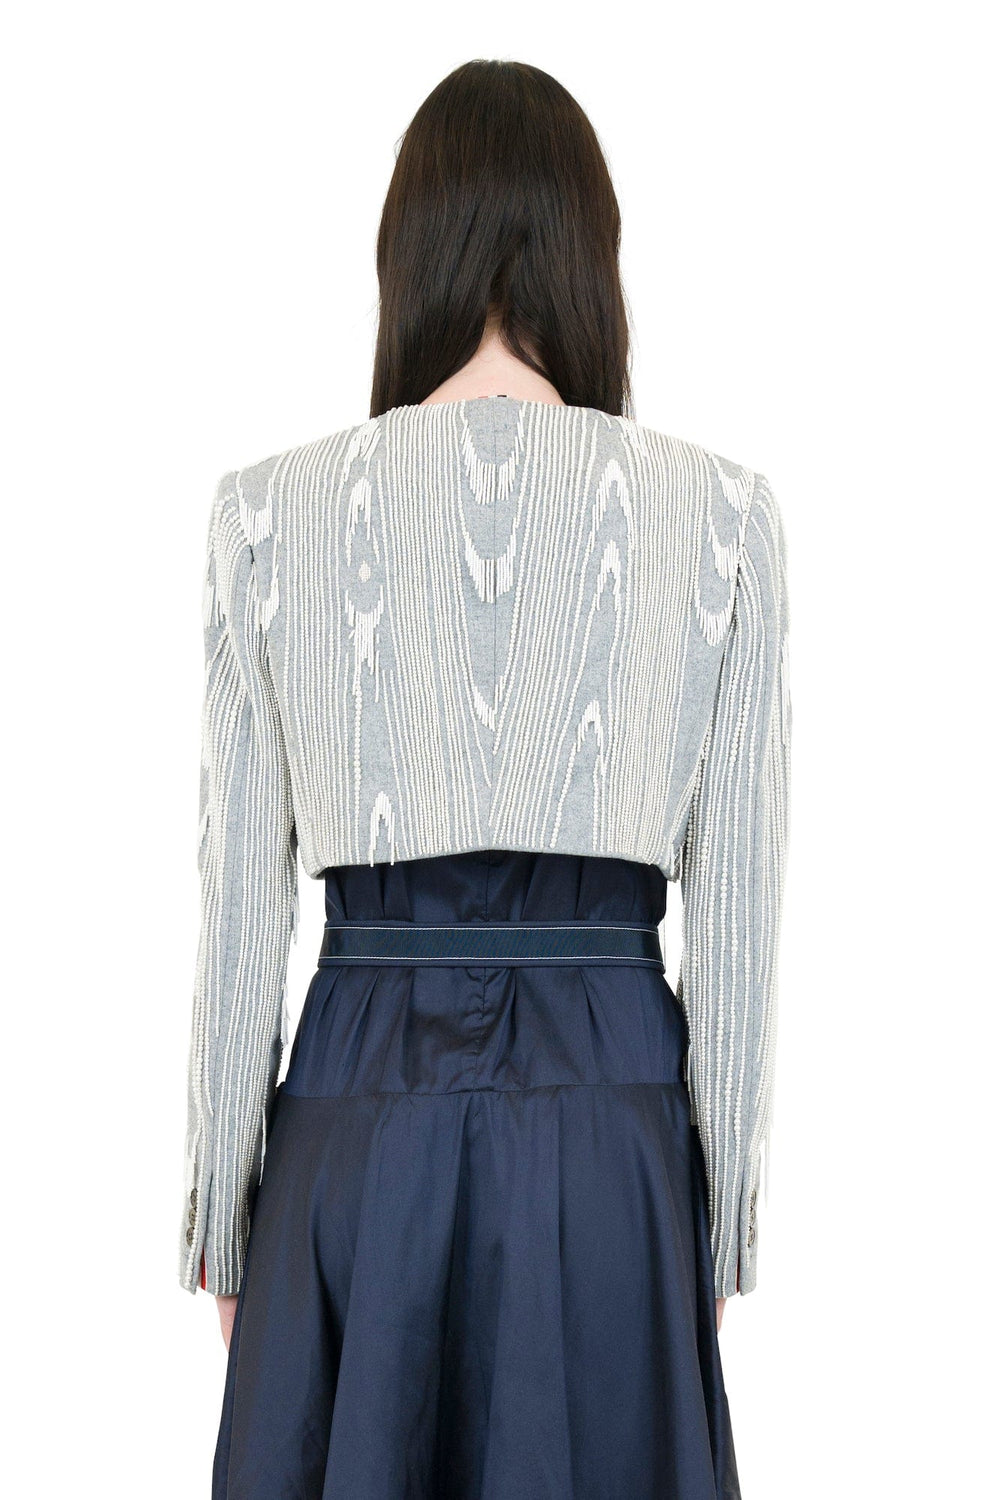 Thom Browne Fitted Cropped Cardigan Jacket in Flannel Pearl Fringe